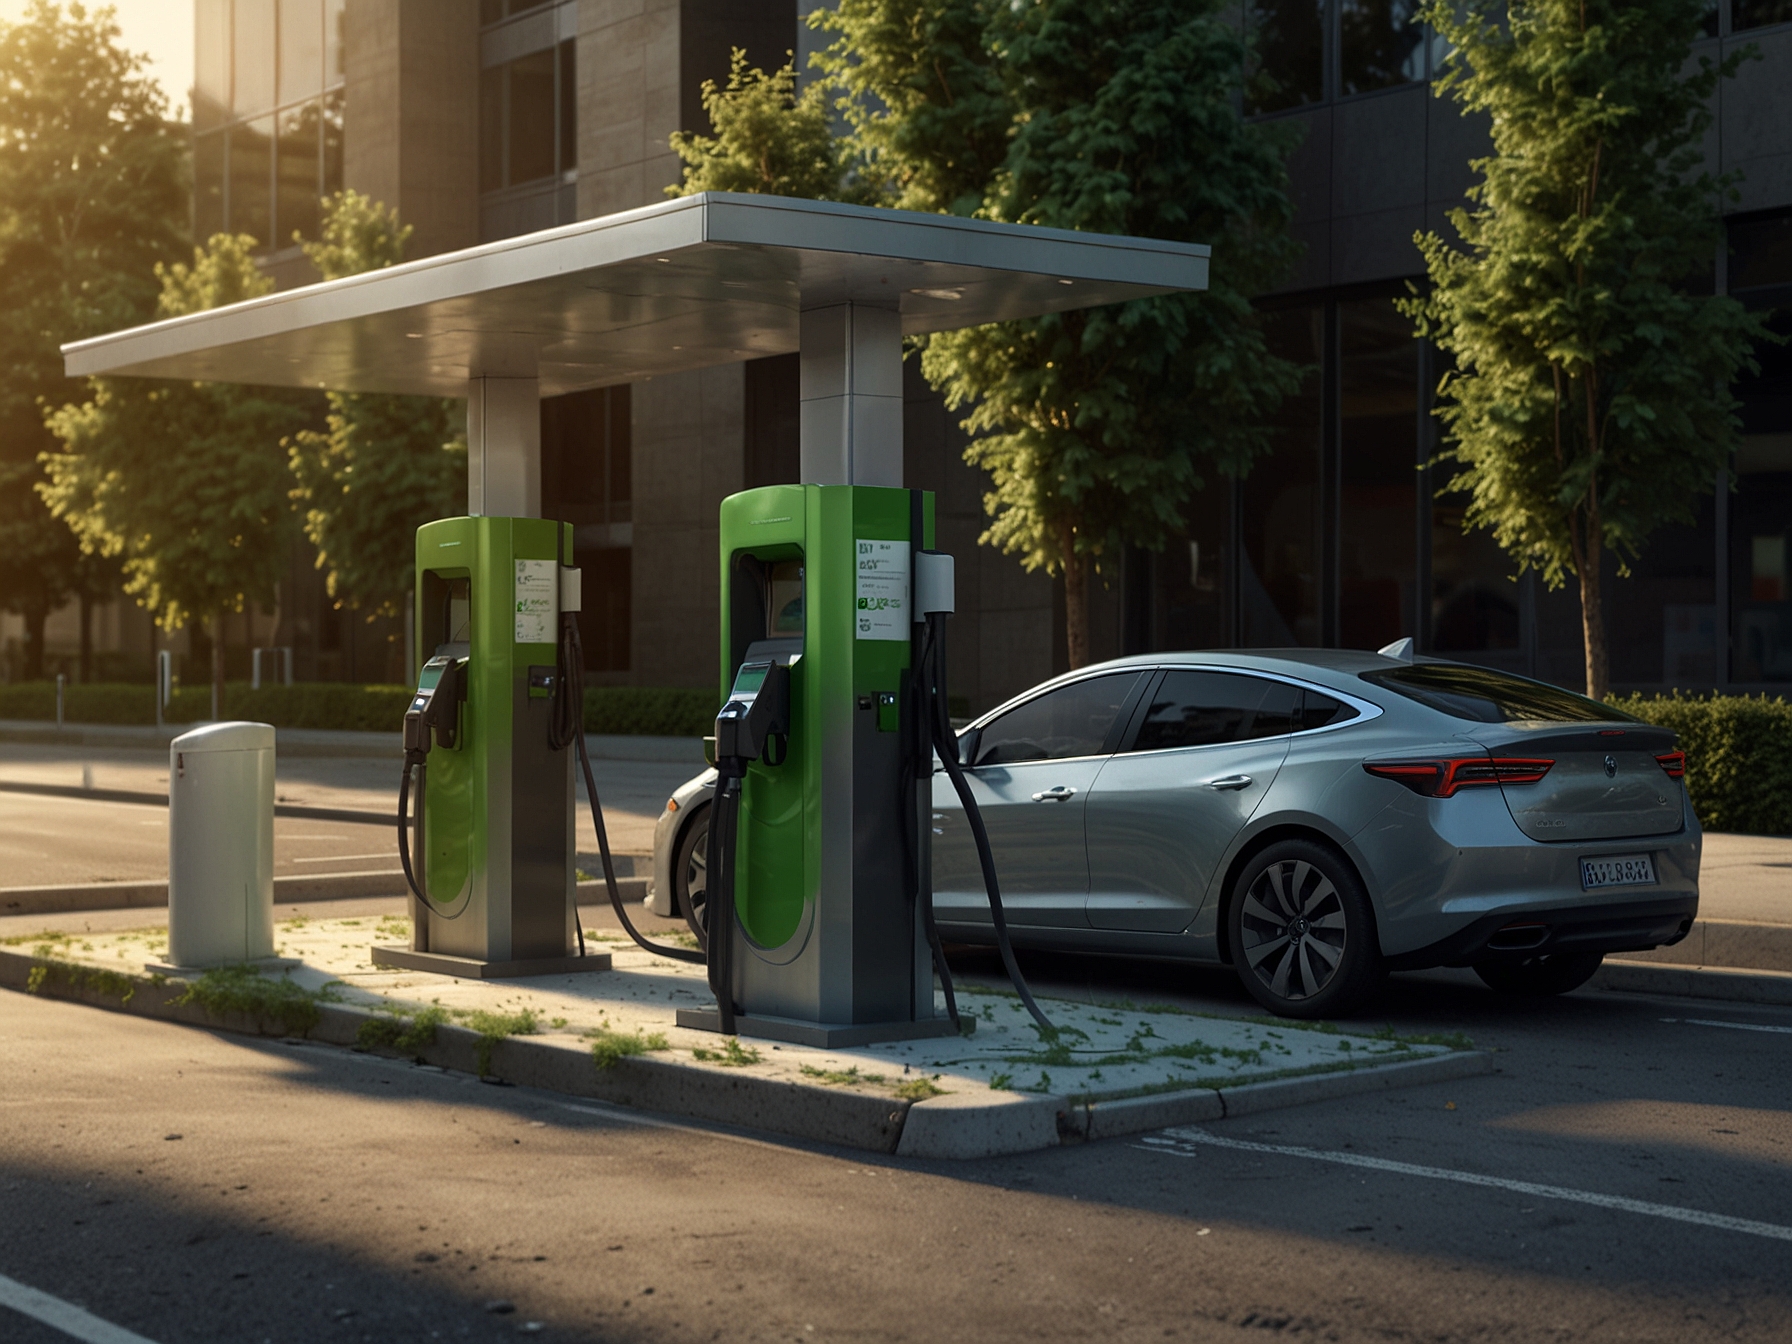 An image illustrating electric and hybrid vehicles parked at a charging station, emphasizing the importance of accessible green technology in reducing carbon emissions.